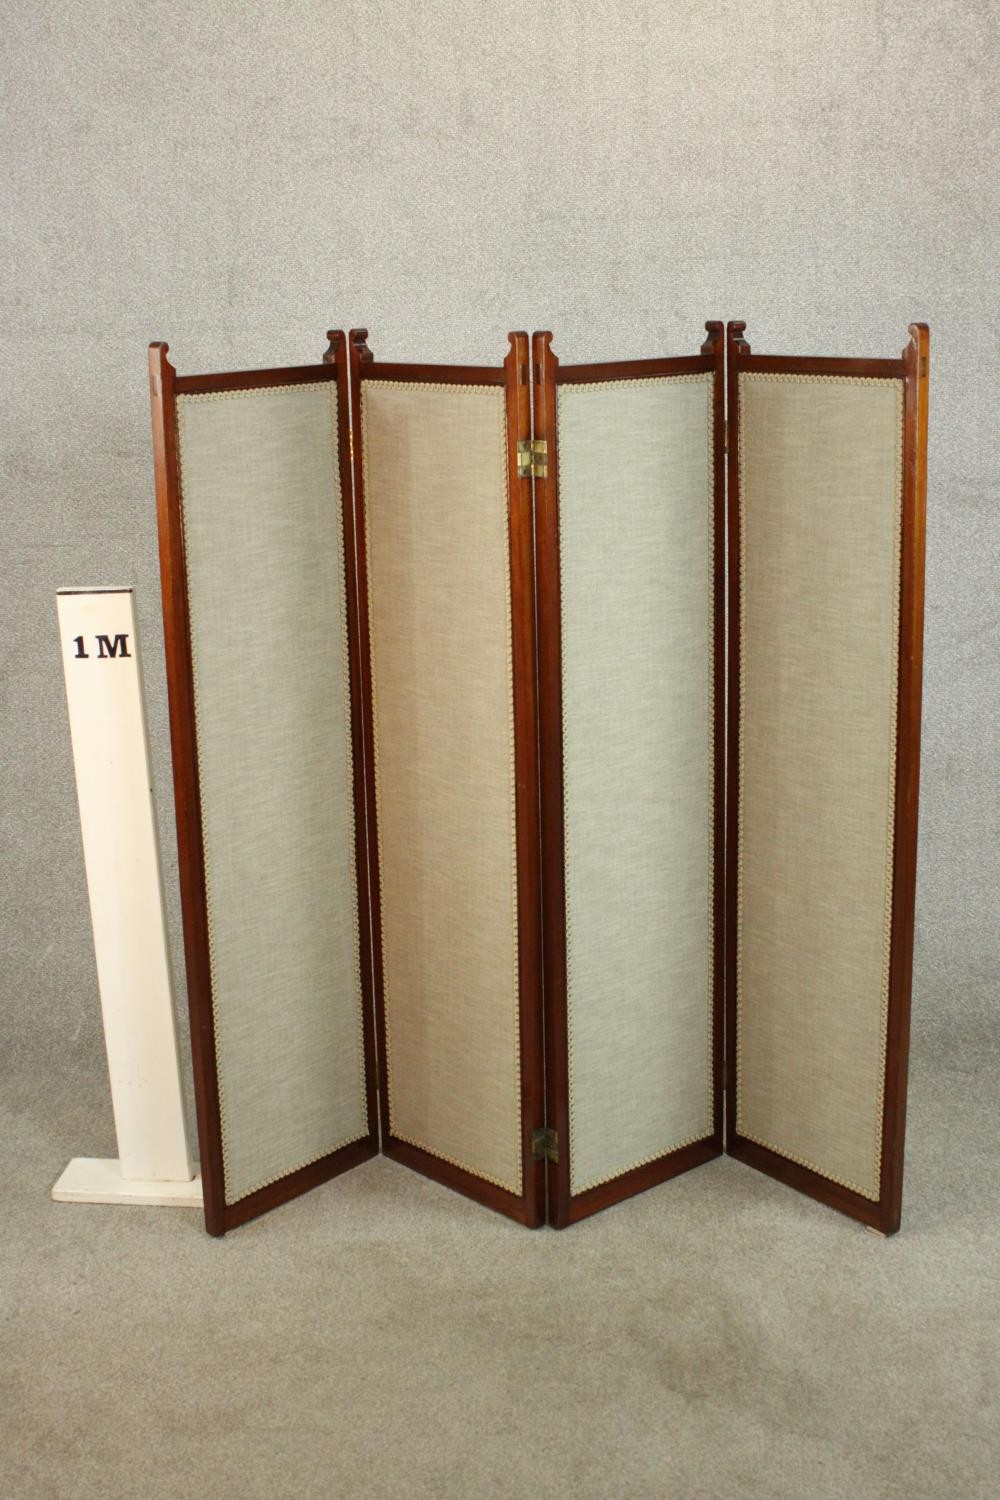 An Edwardian walnut fourfold screen, each panel upholstered with an oatmeal coloured fabric, with - Image 2 of 10